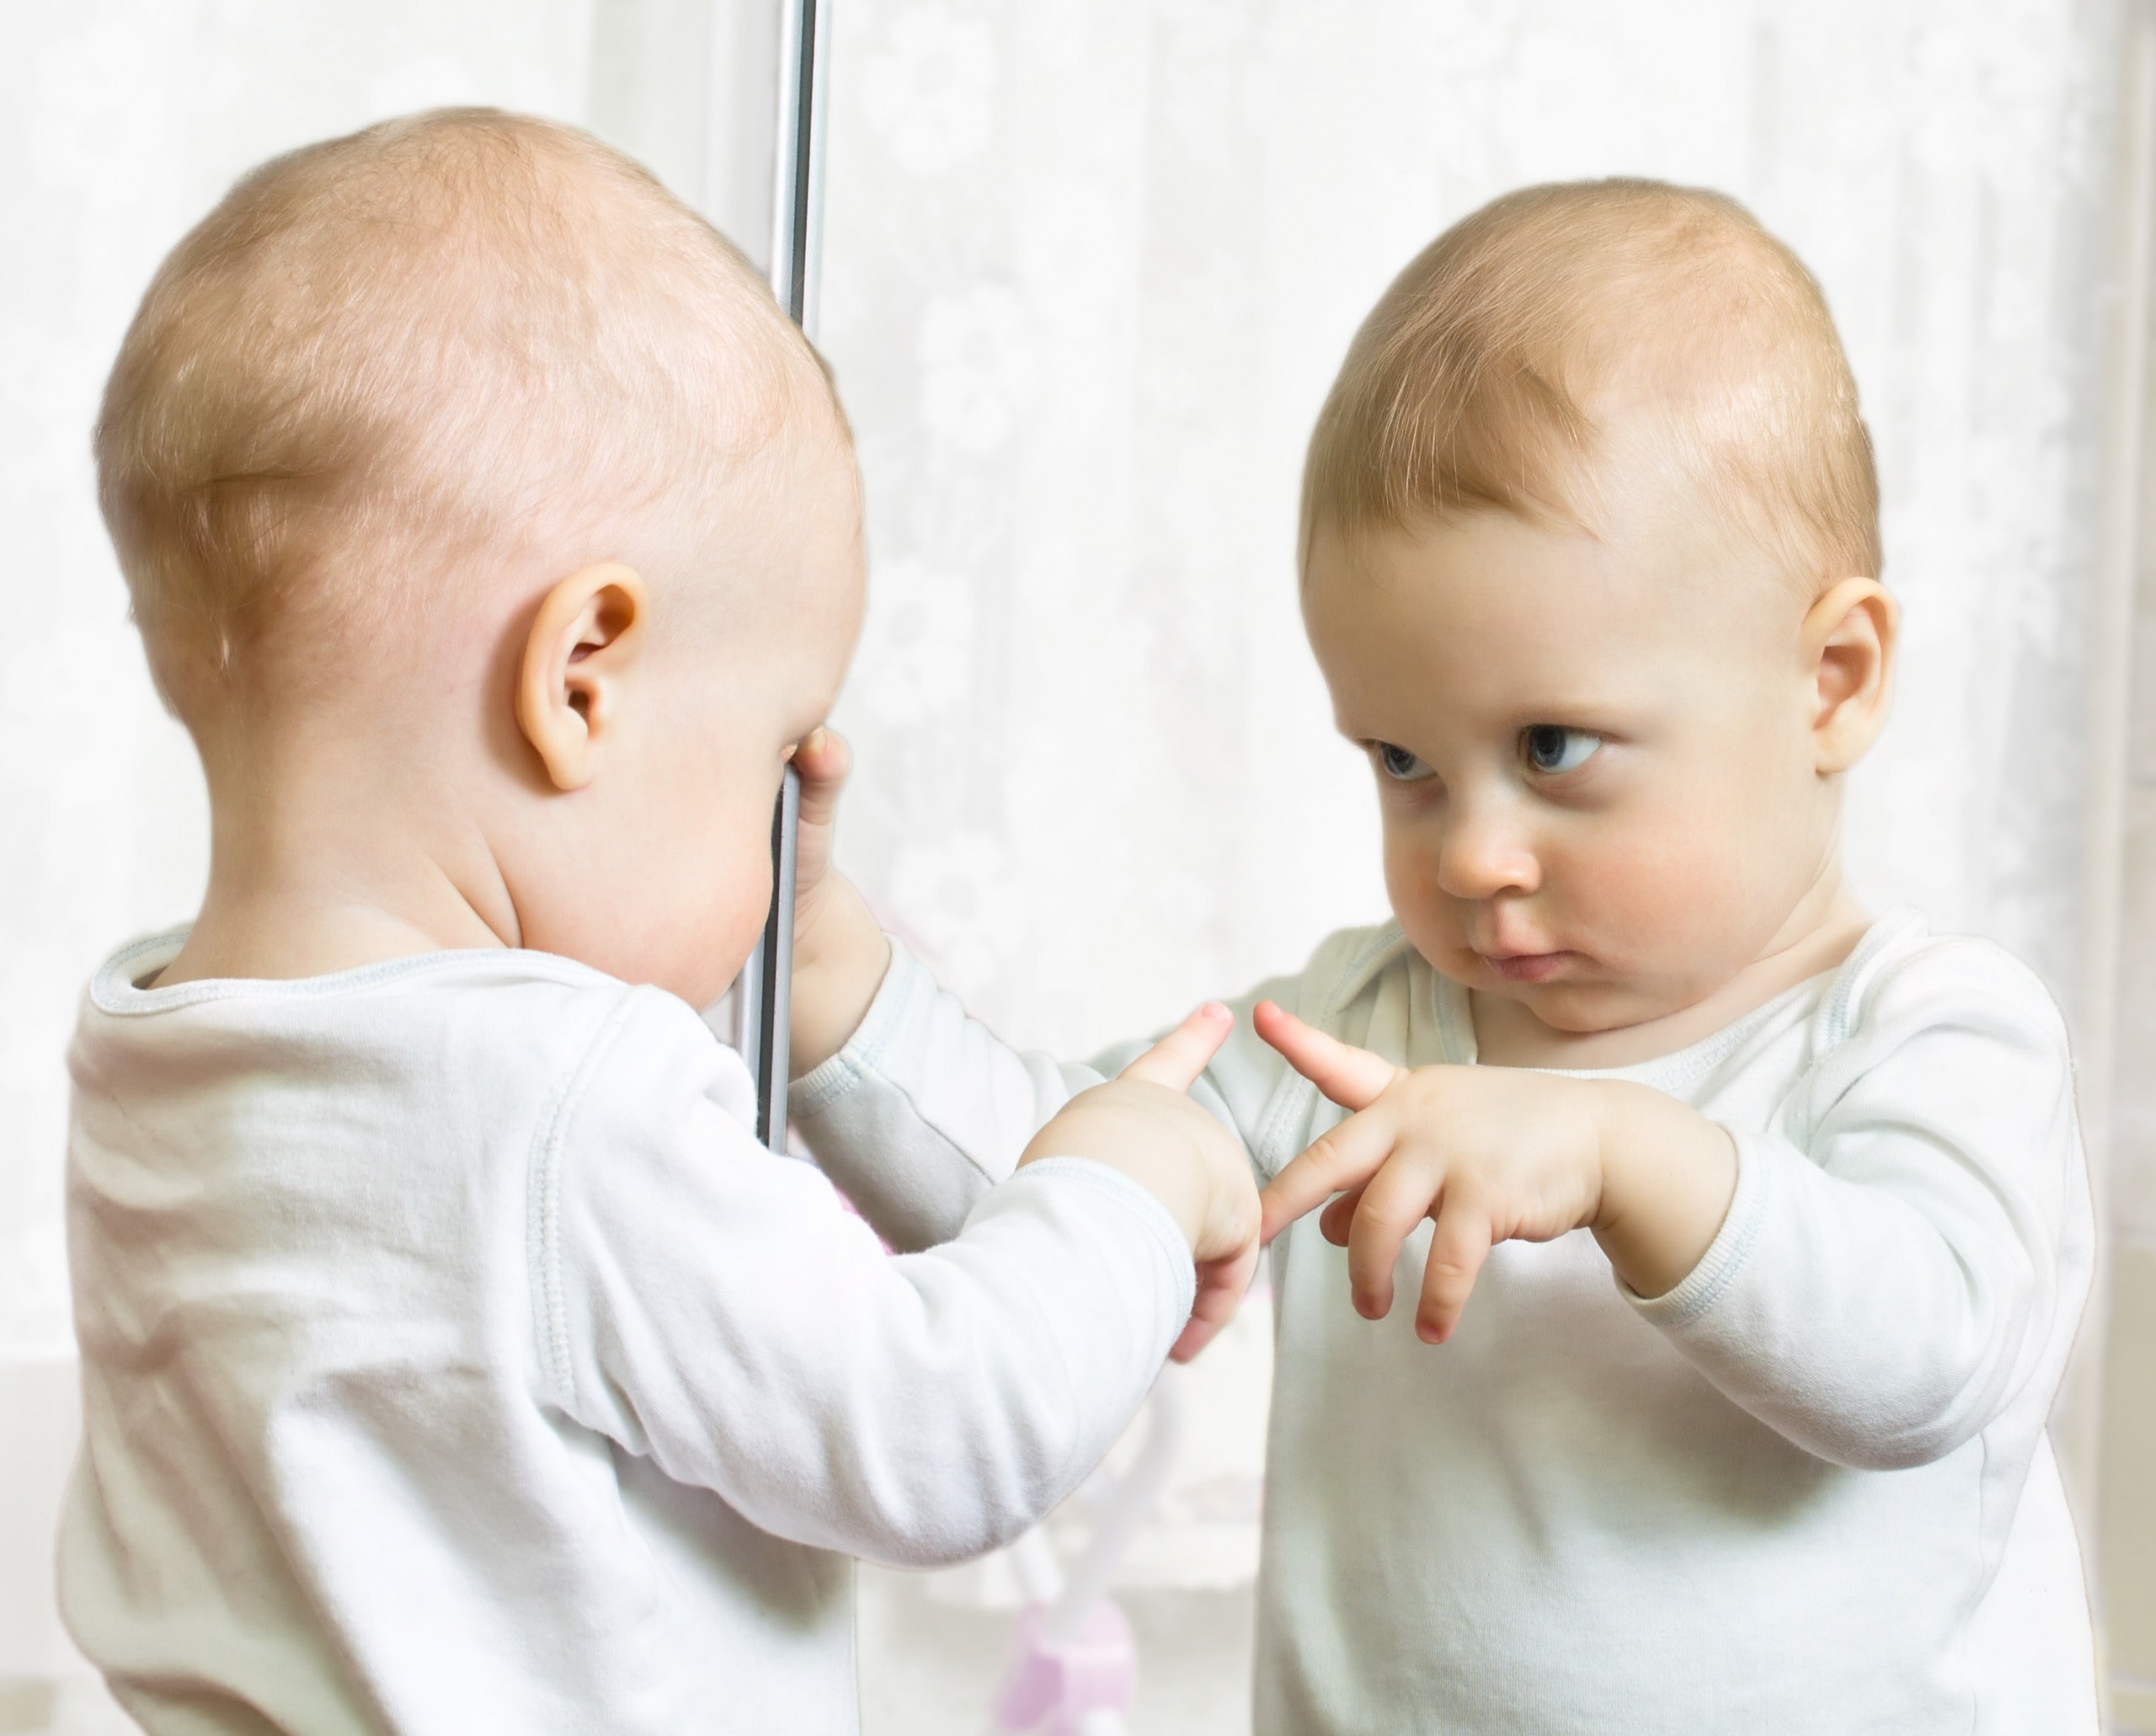 Ten month boy stands before the mirror